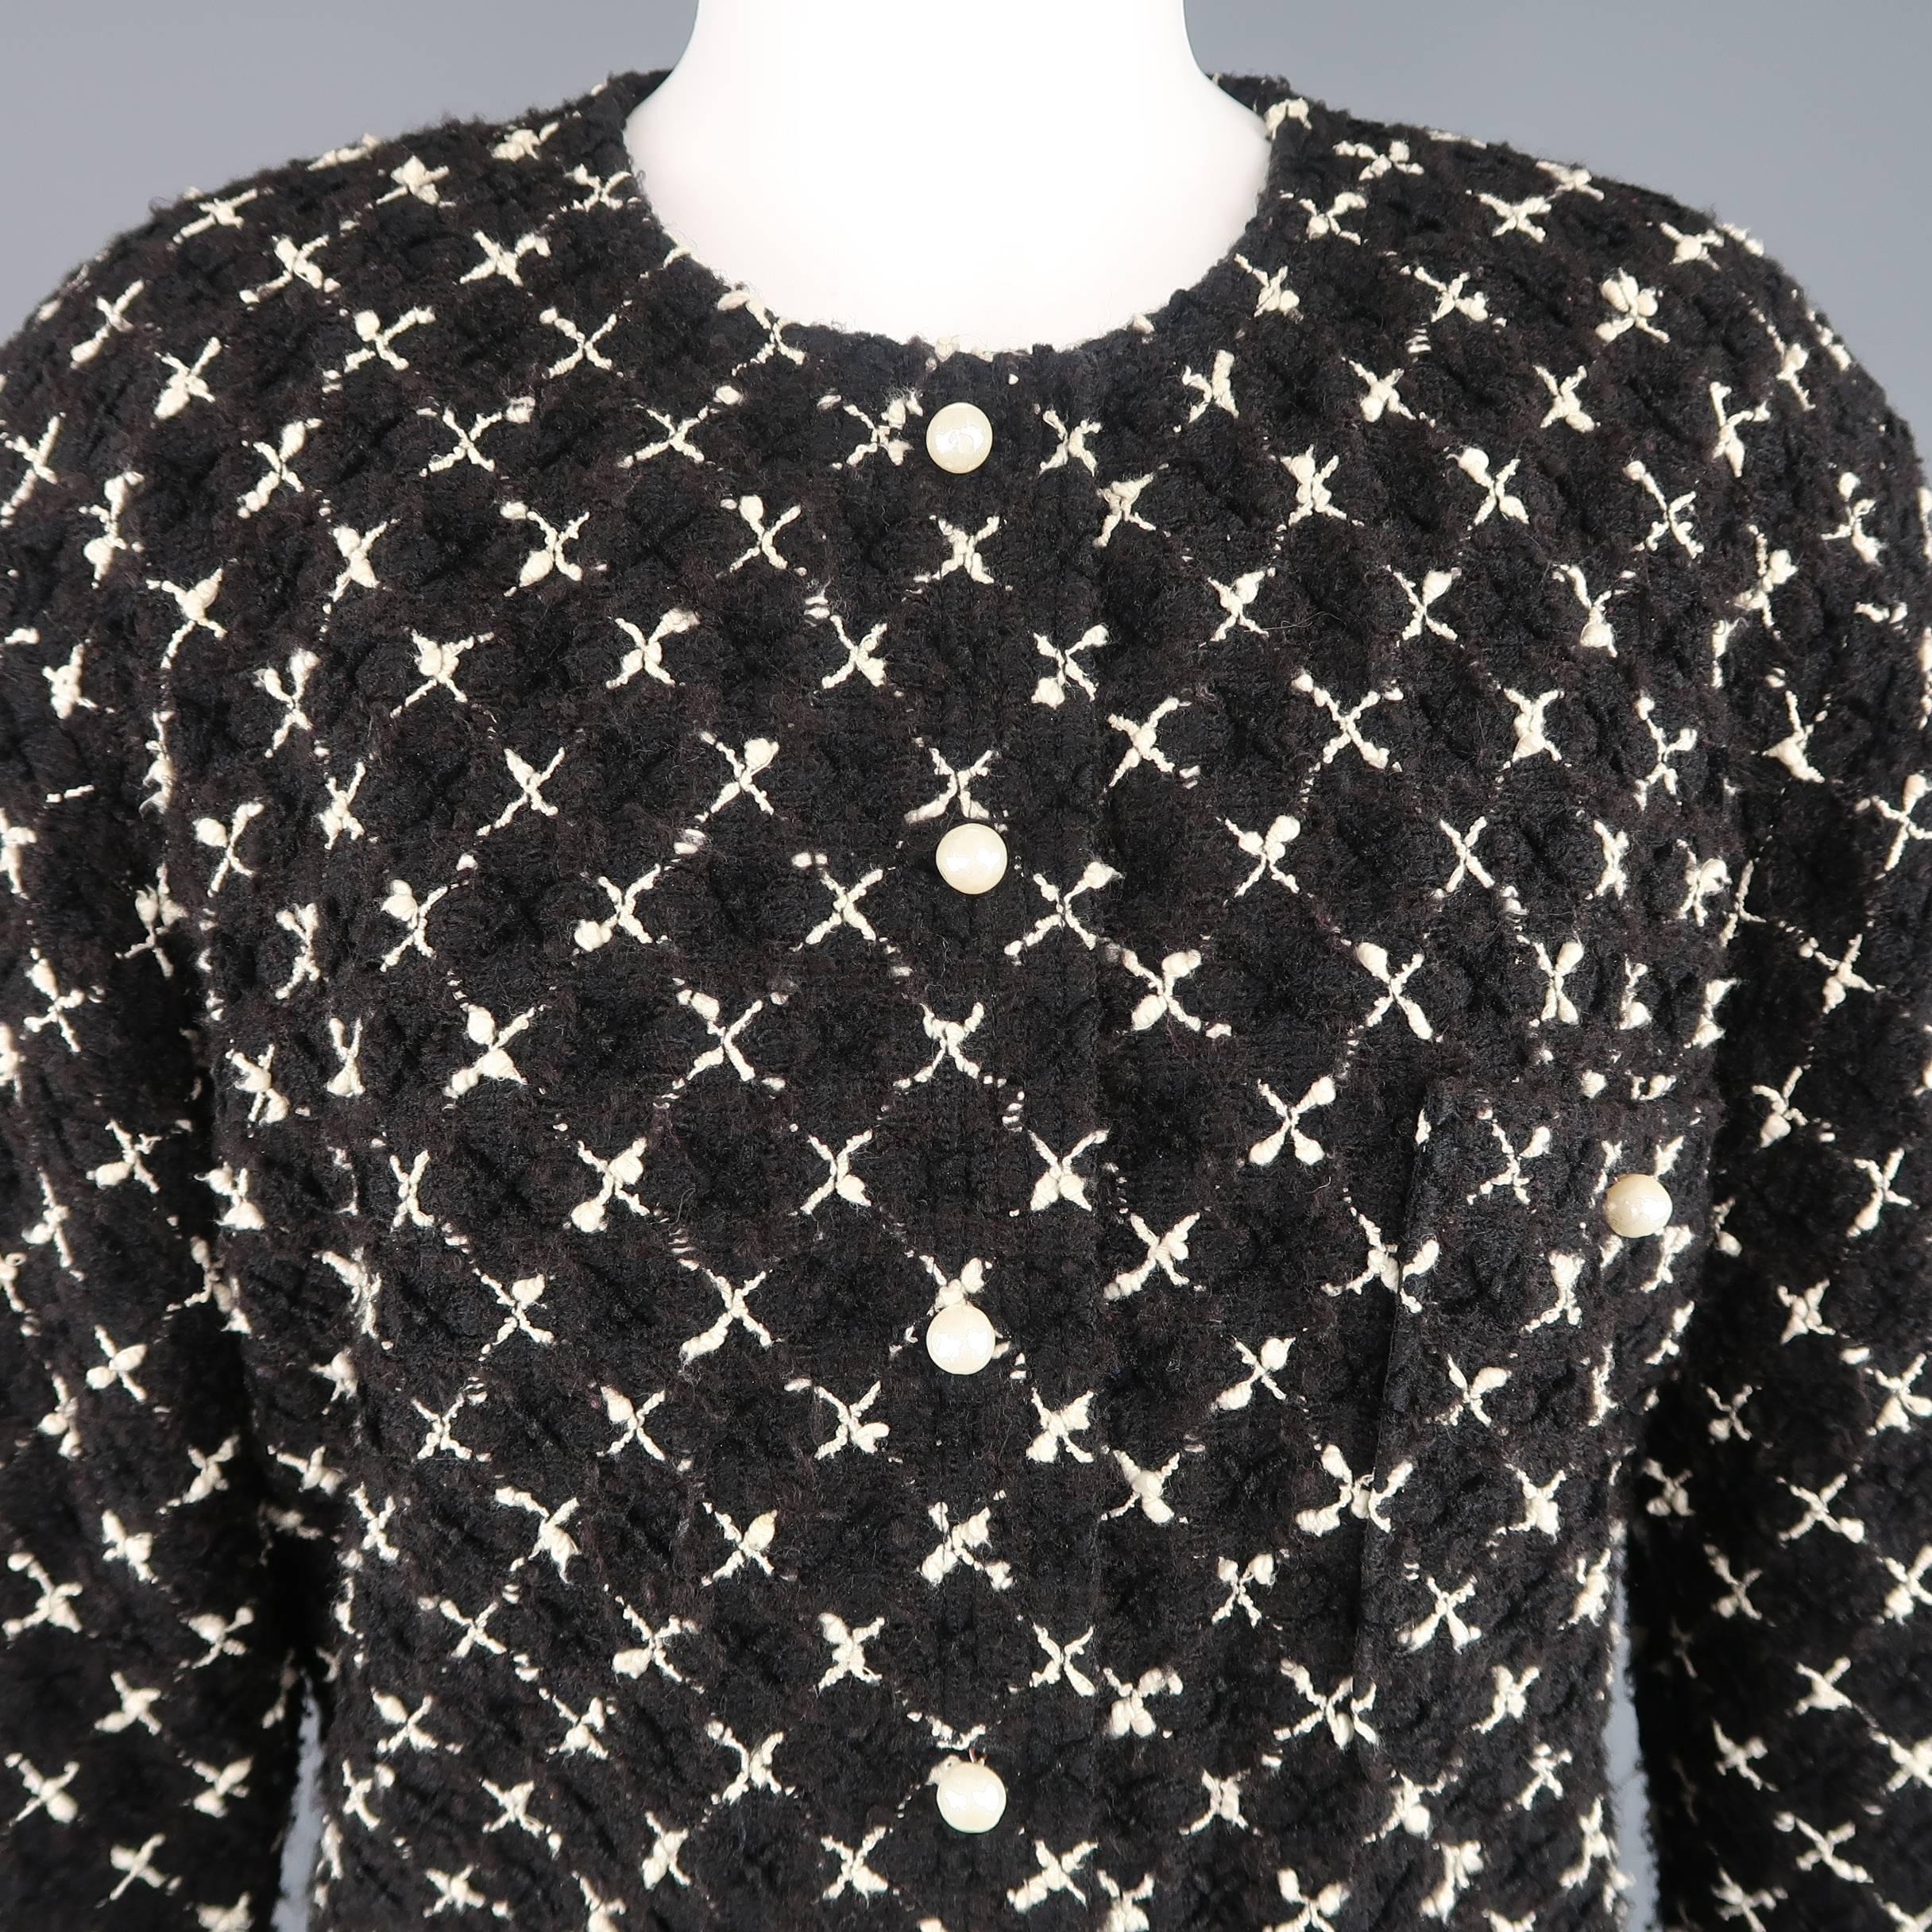 Vintage 1980's CHANEL jacket comes in a black and creamy beige X cross pattern tweed and features a round, collarless neckline, triple patch pocket front, and button up closure with pearl buttons. Minor wear throughout. Made in France.
 
Good